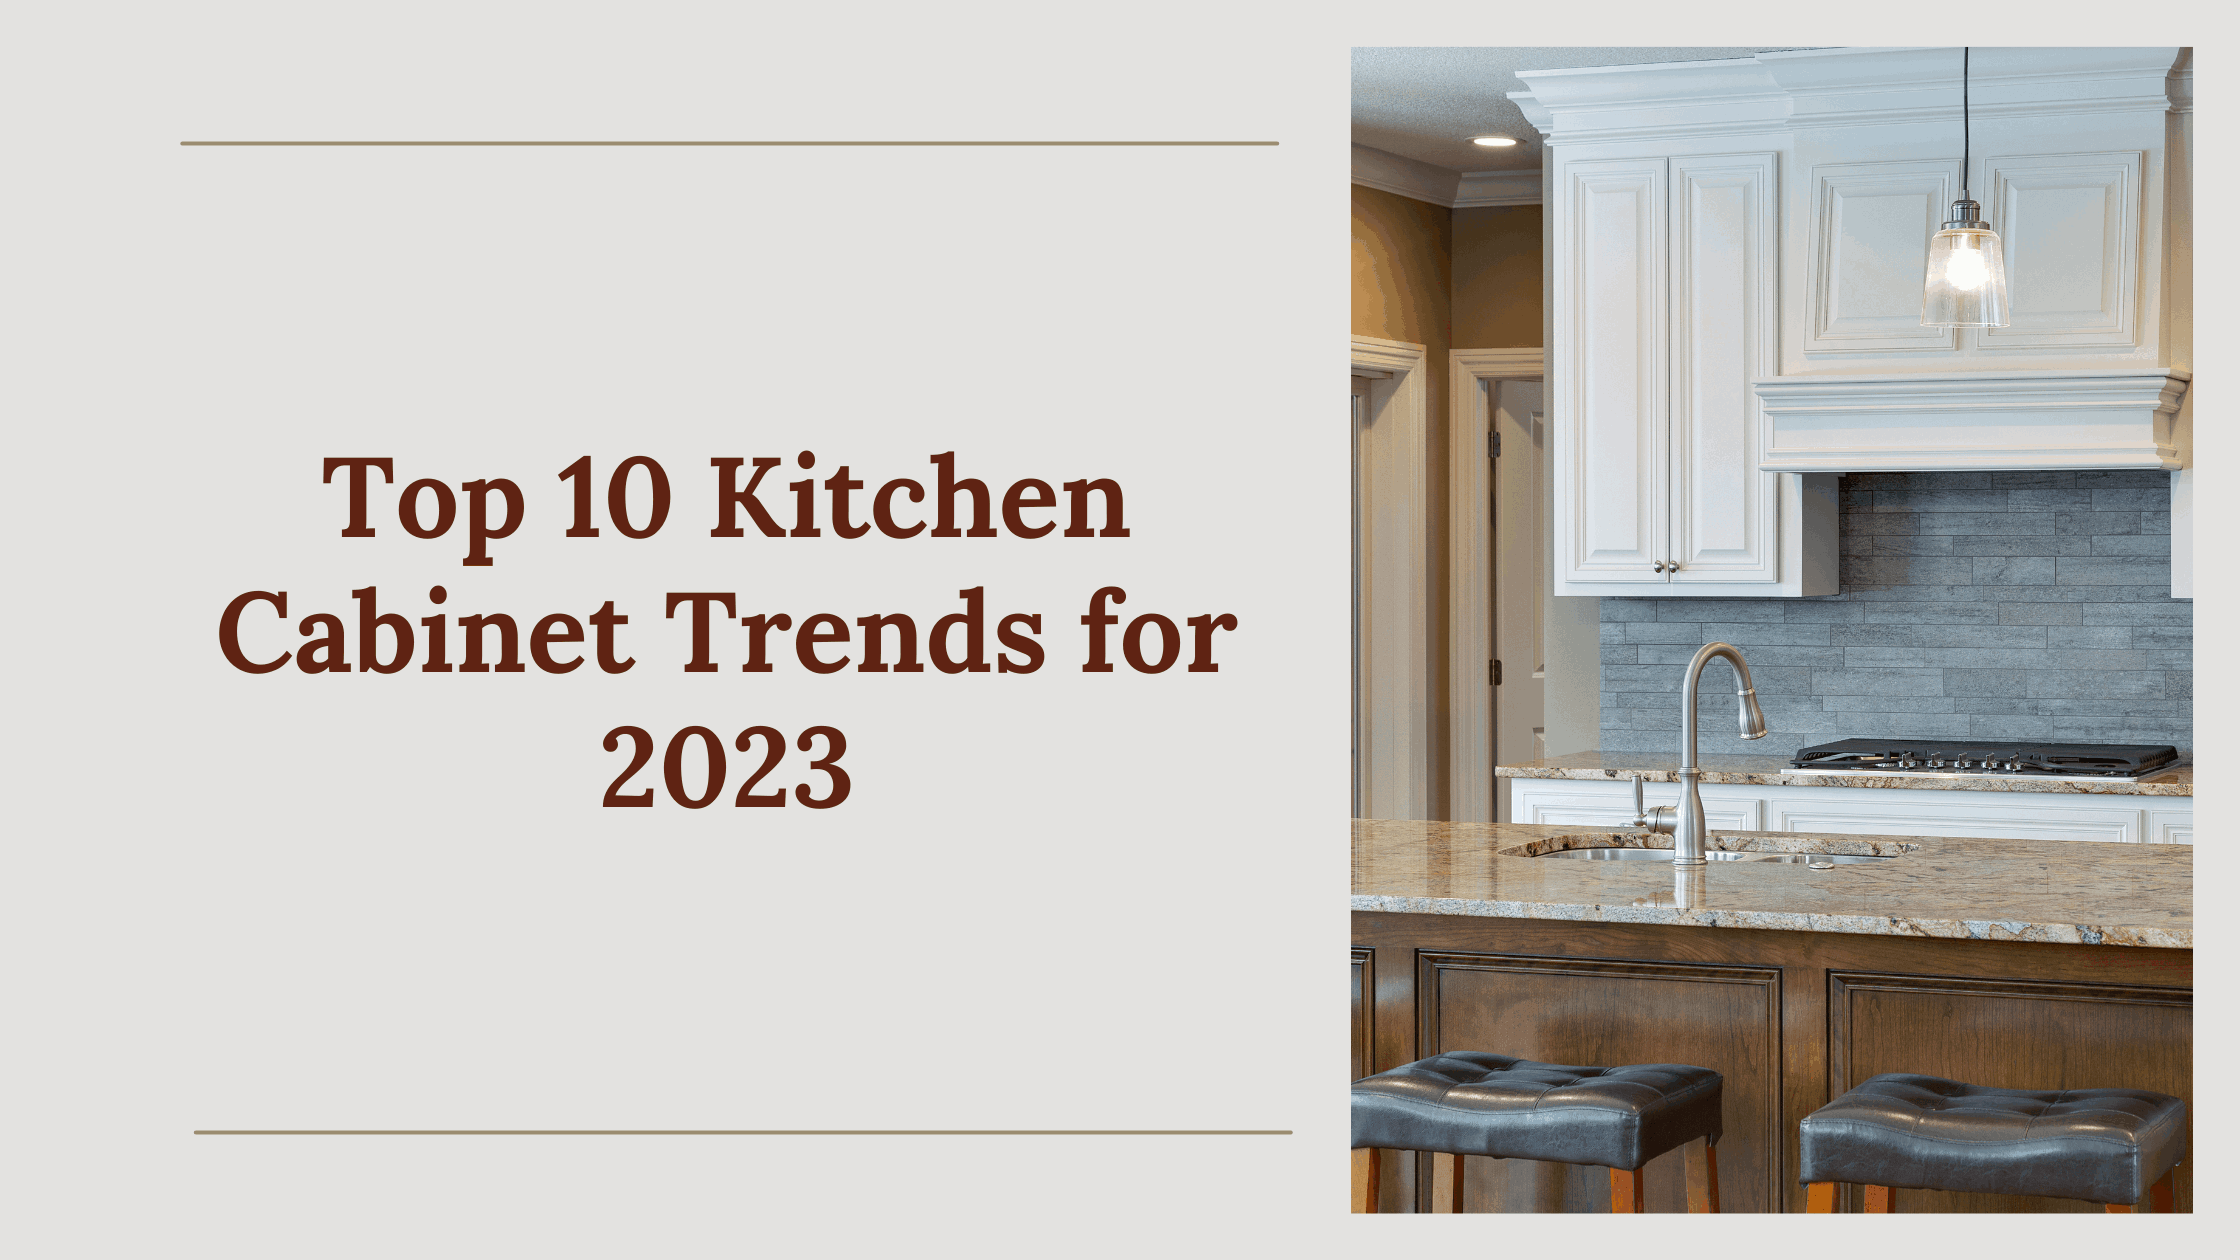 6 Kitchen Material Trends: How to Get the Look for Less